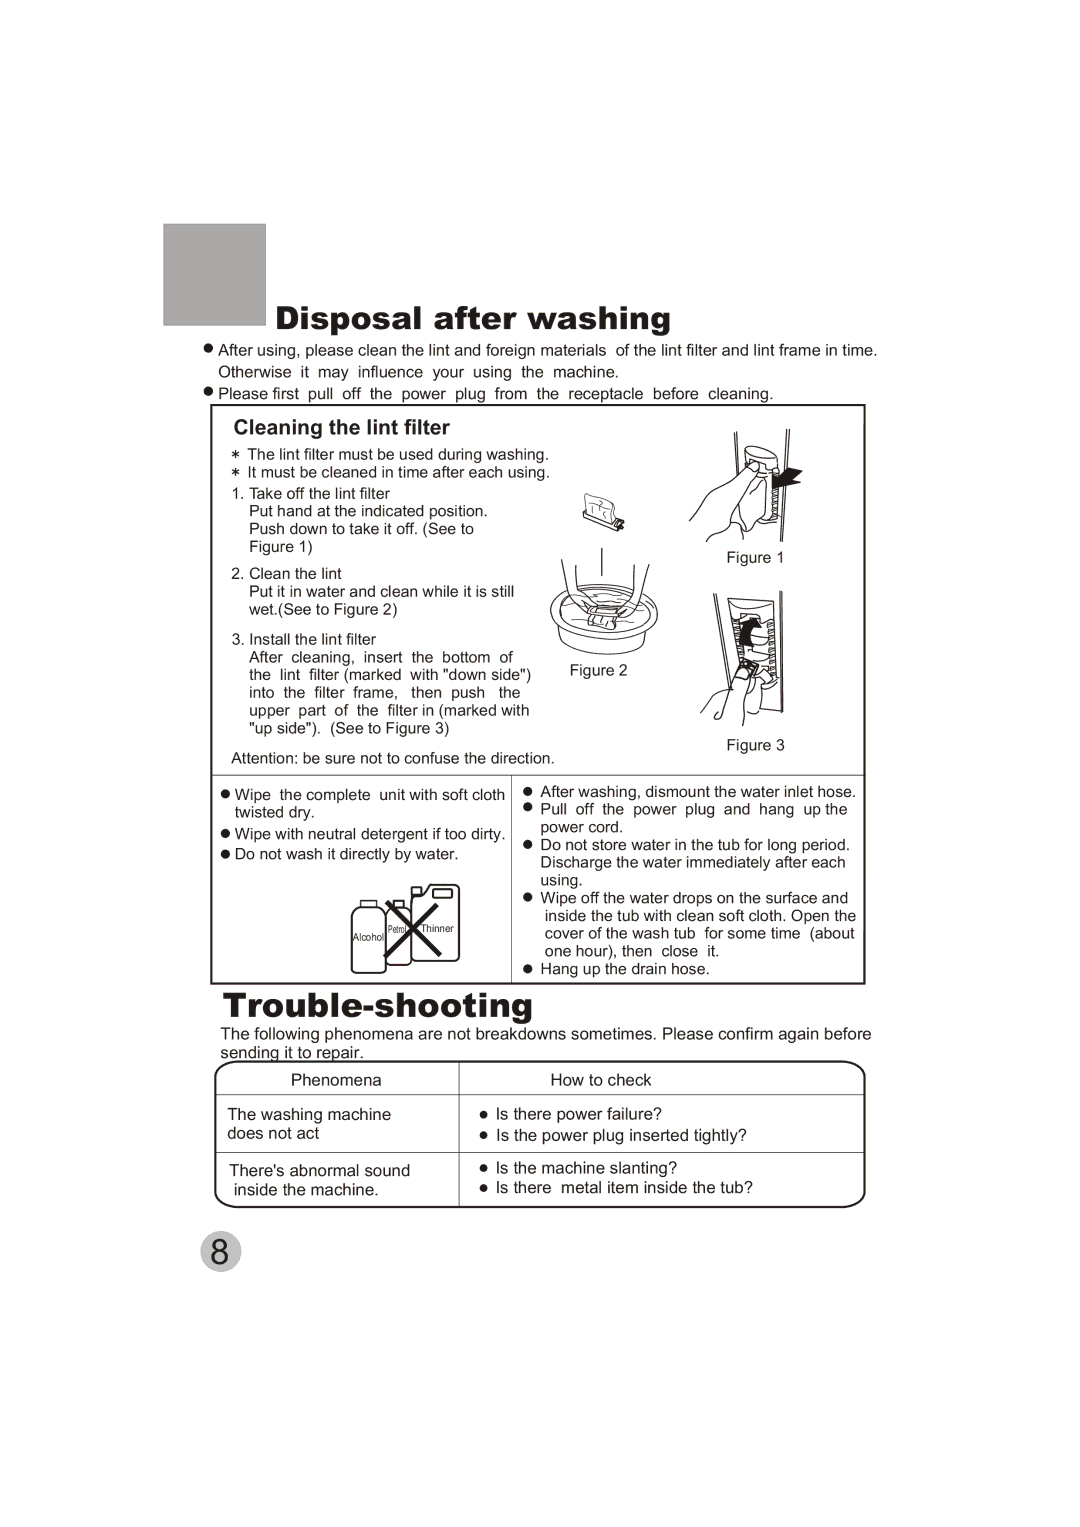 Emerald Innovations EW-2500MG manual Disposal after washing, Cleaning the lint filter 